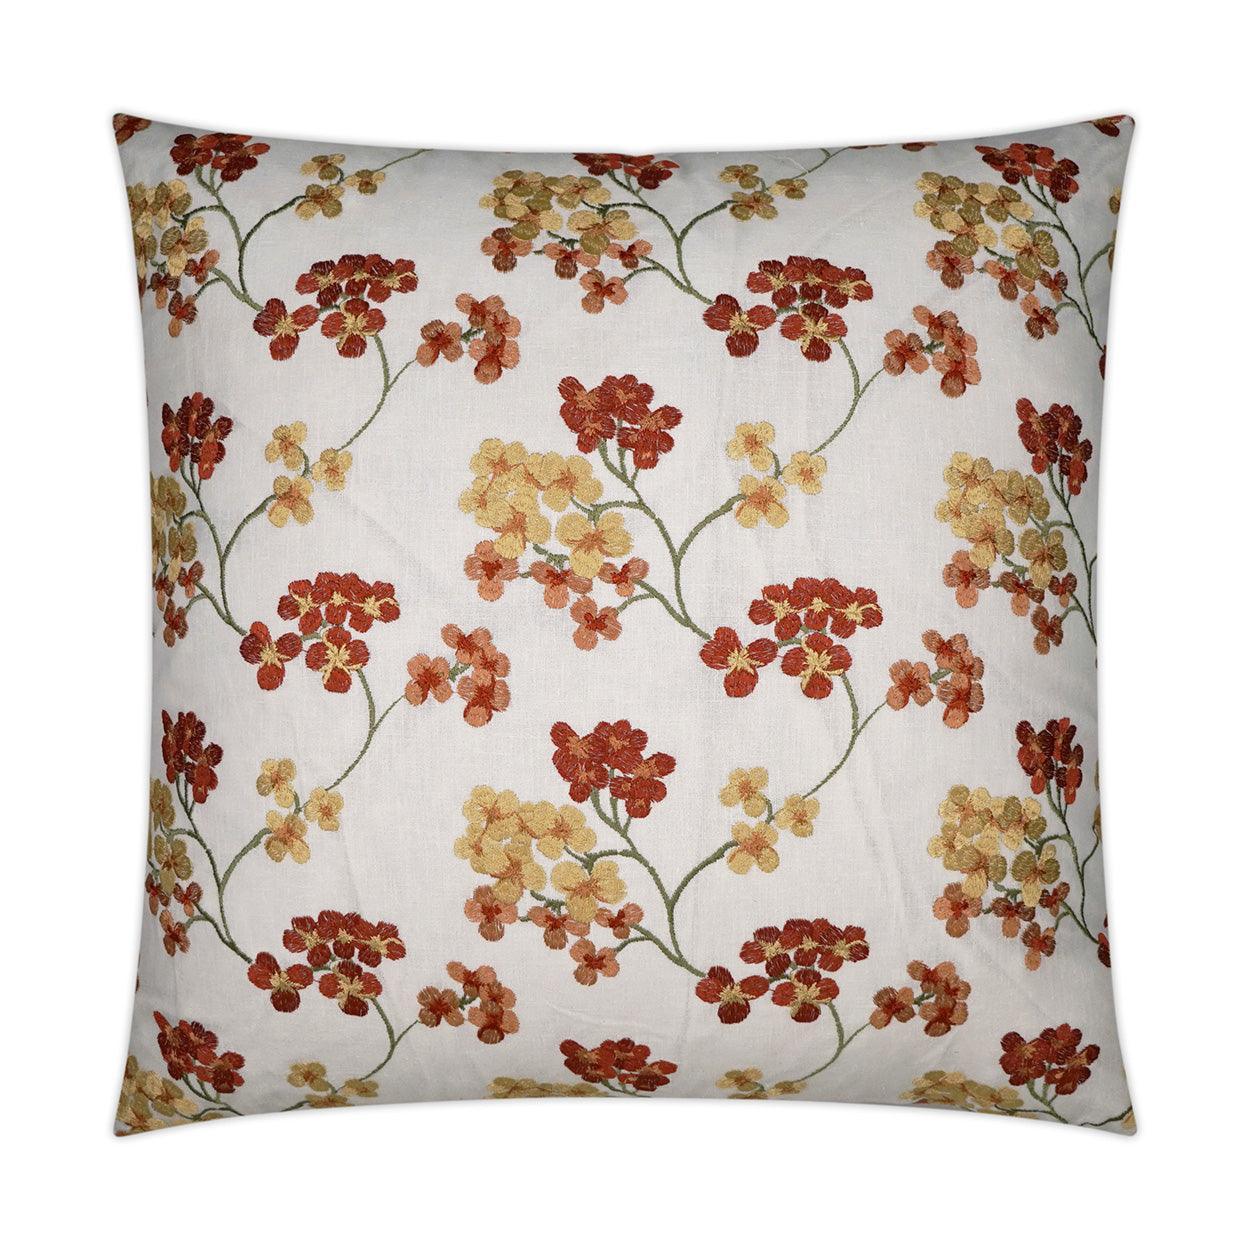 Demi Sunset Floral Embroidery Orange Yellow Large Throw Pillow With Insert - Uptown Sebastian